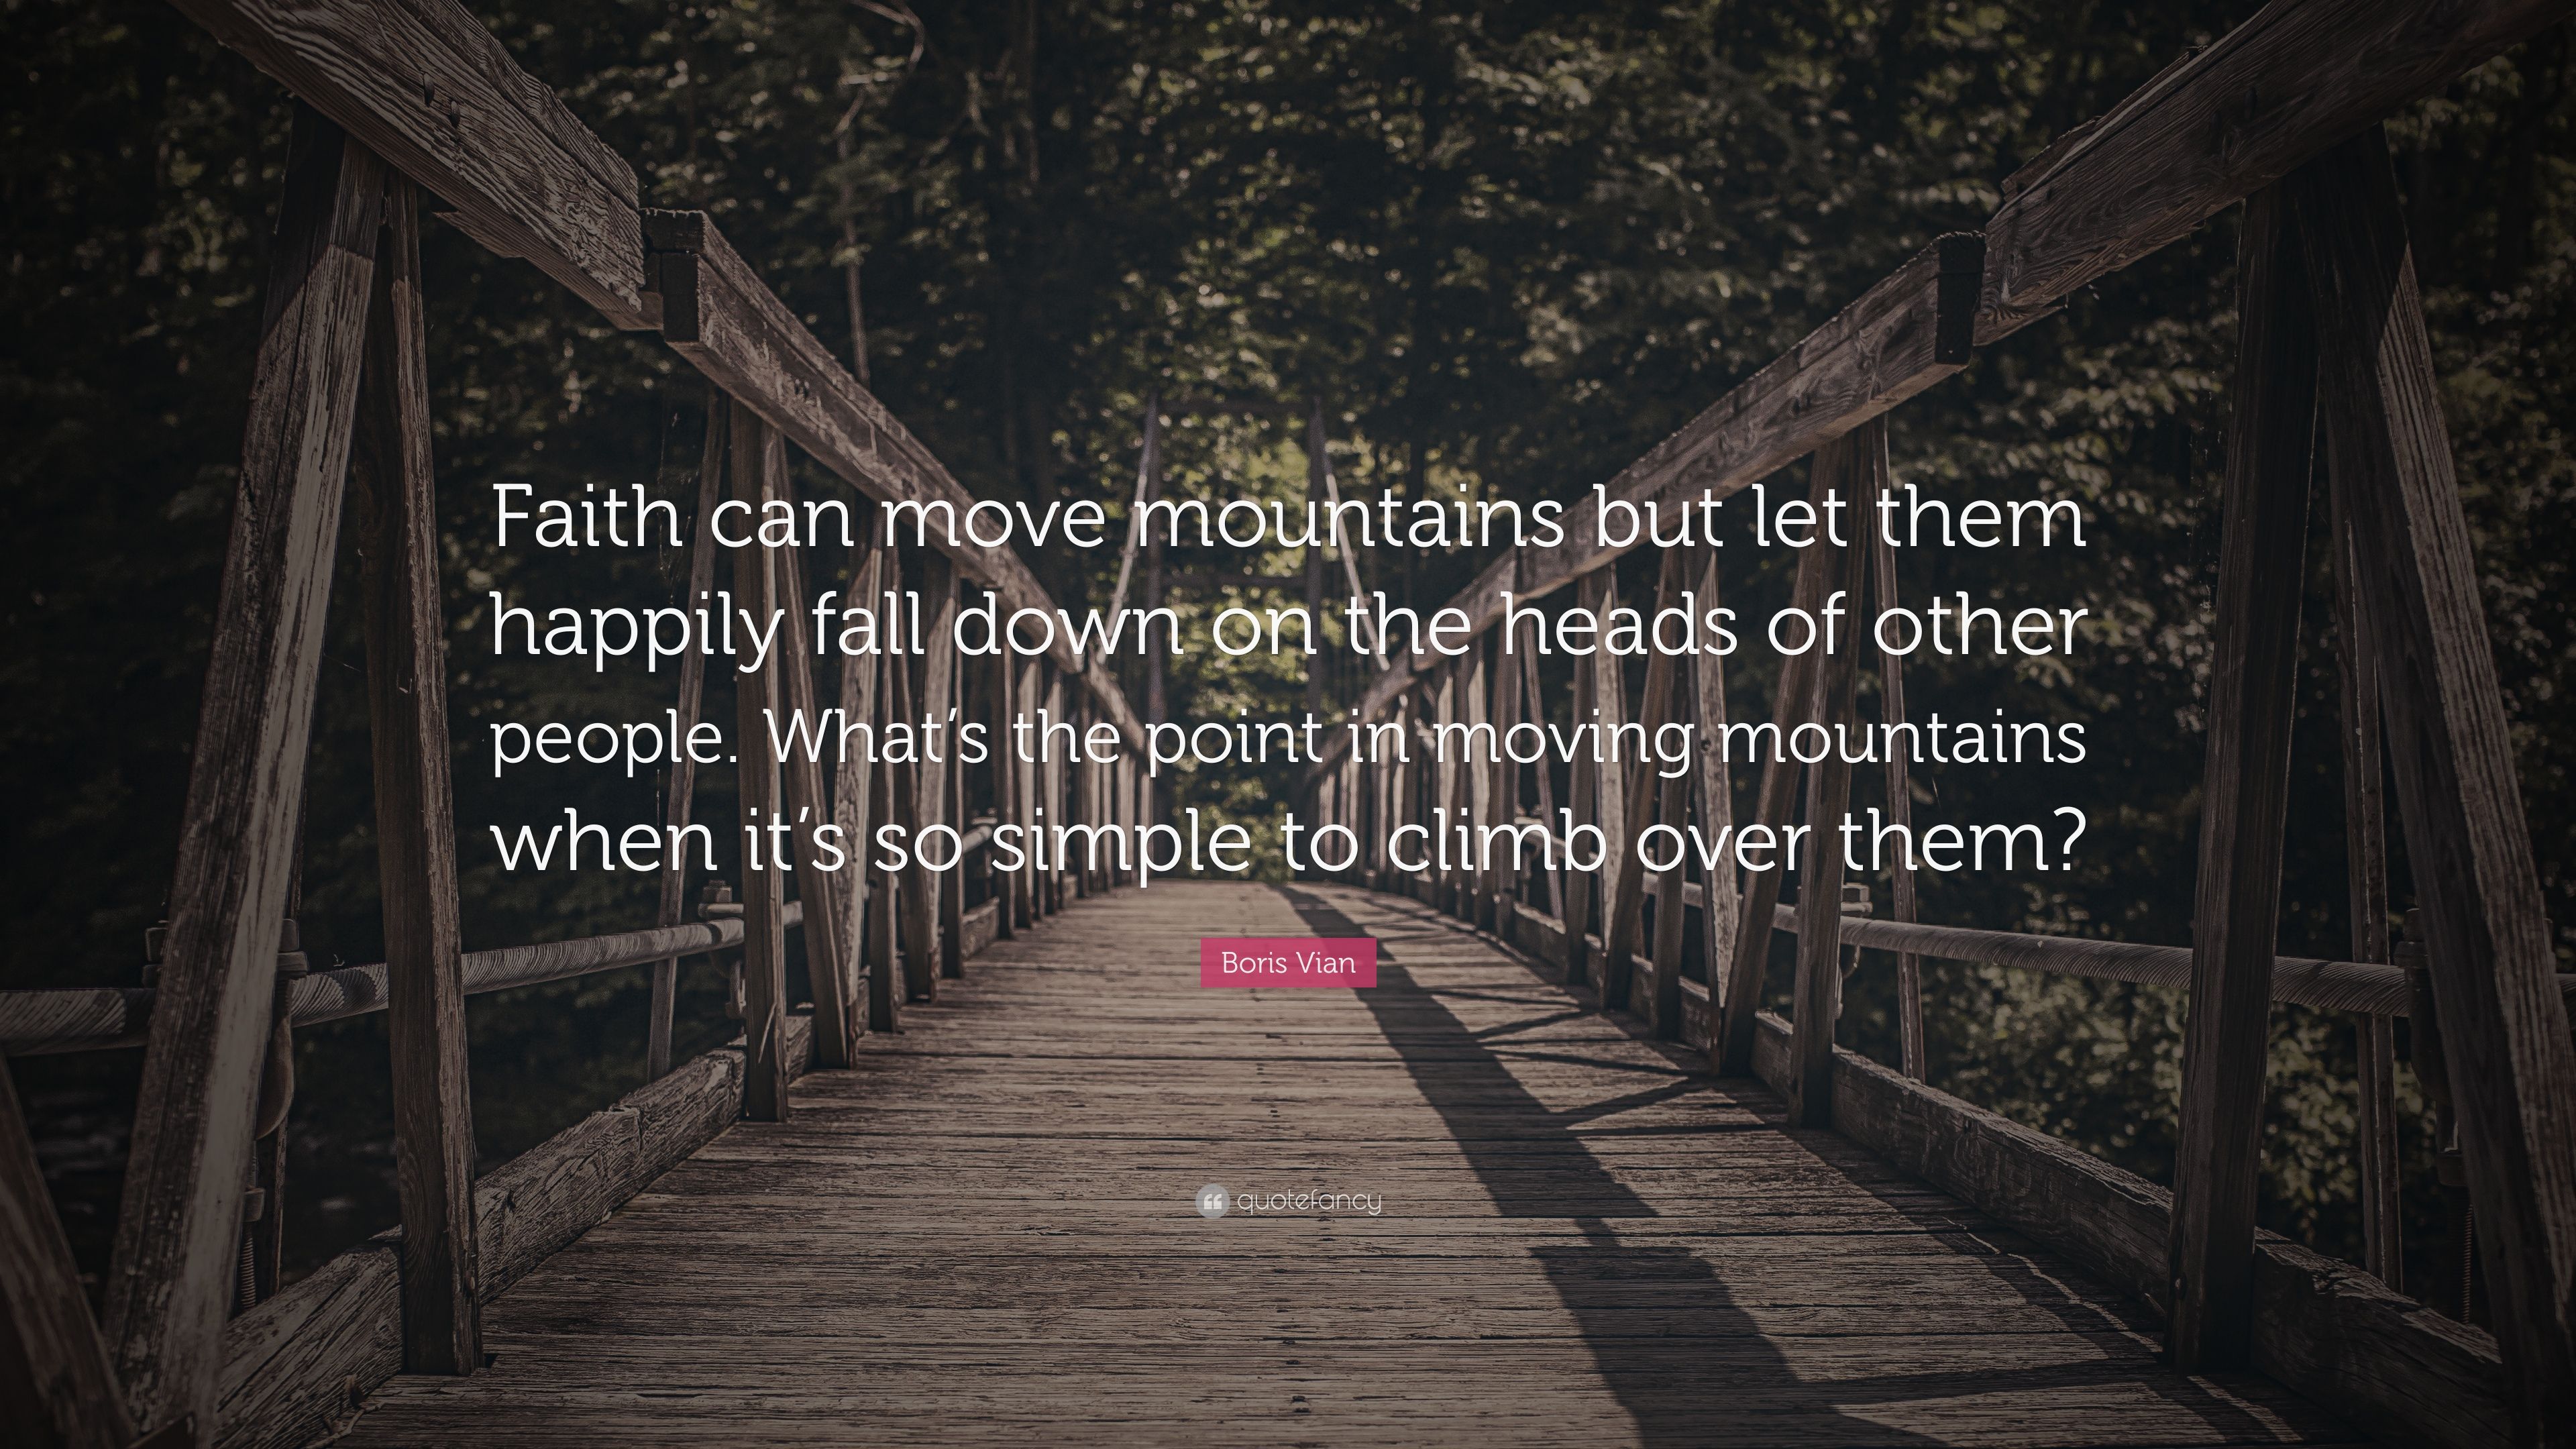 Boris Vian Quote: “Faith can move mountains but let them happily